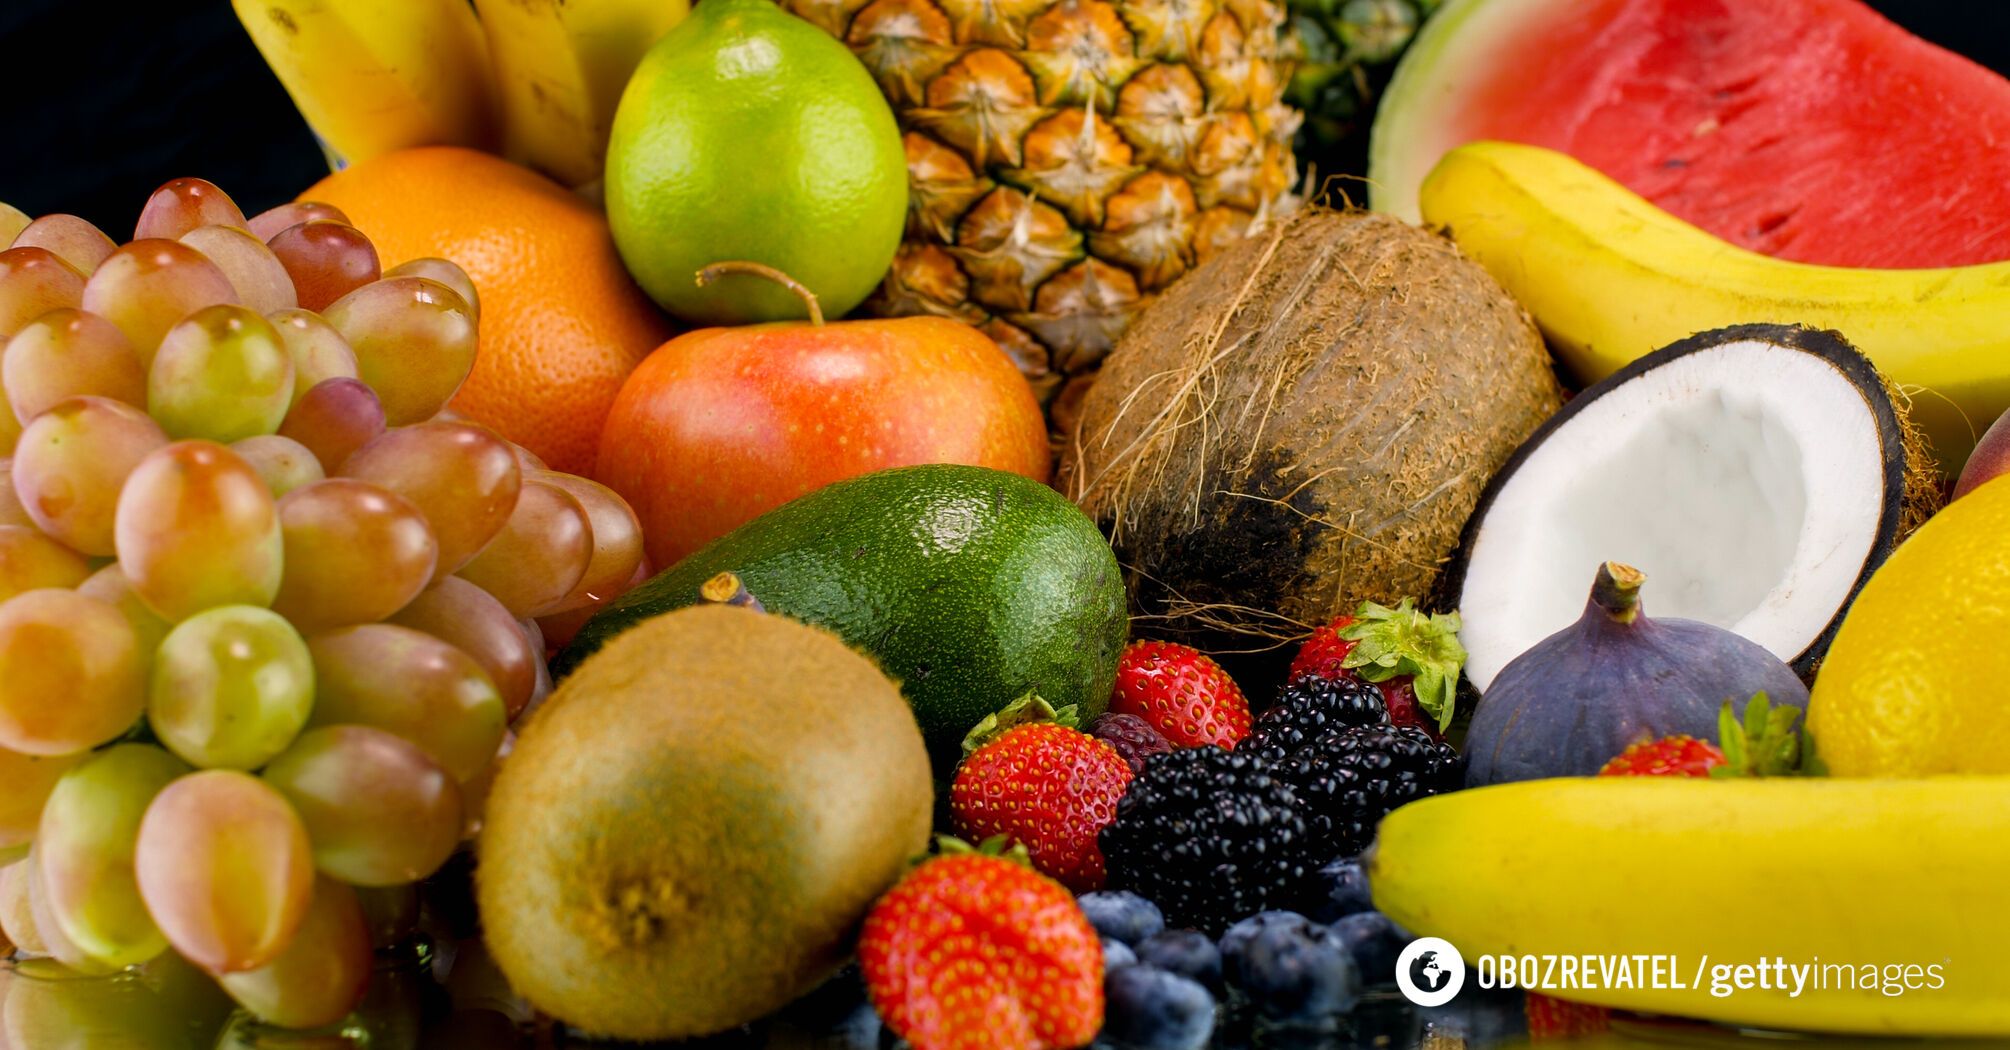 Fruits can contribute to weight gain because they contain fats and fructose